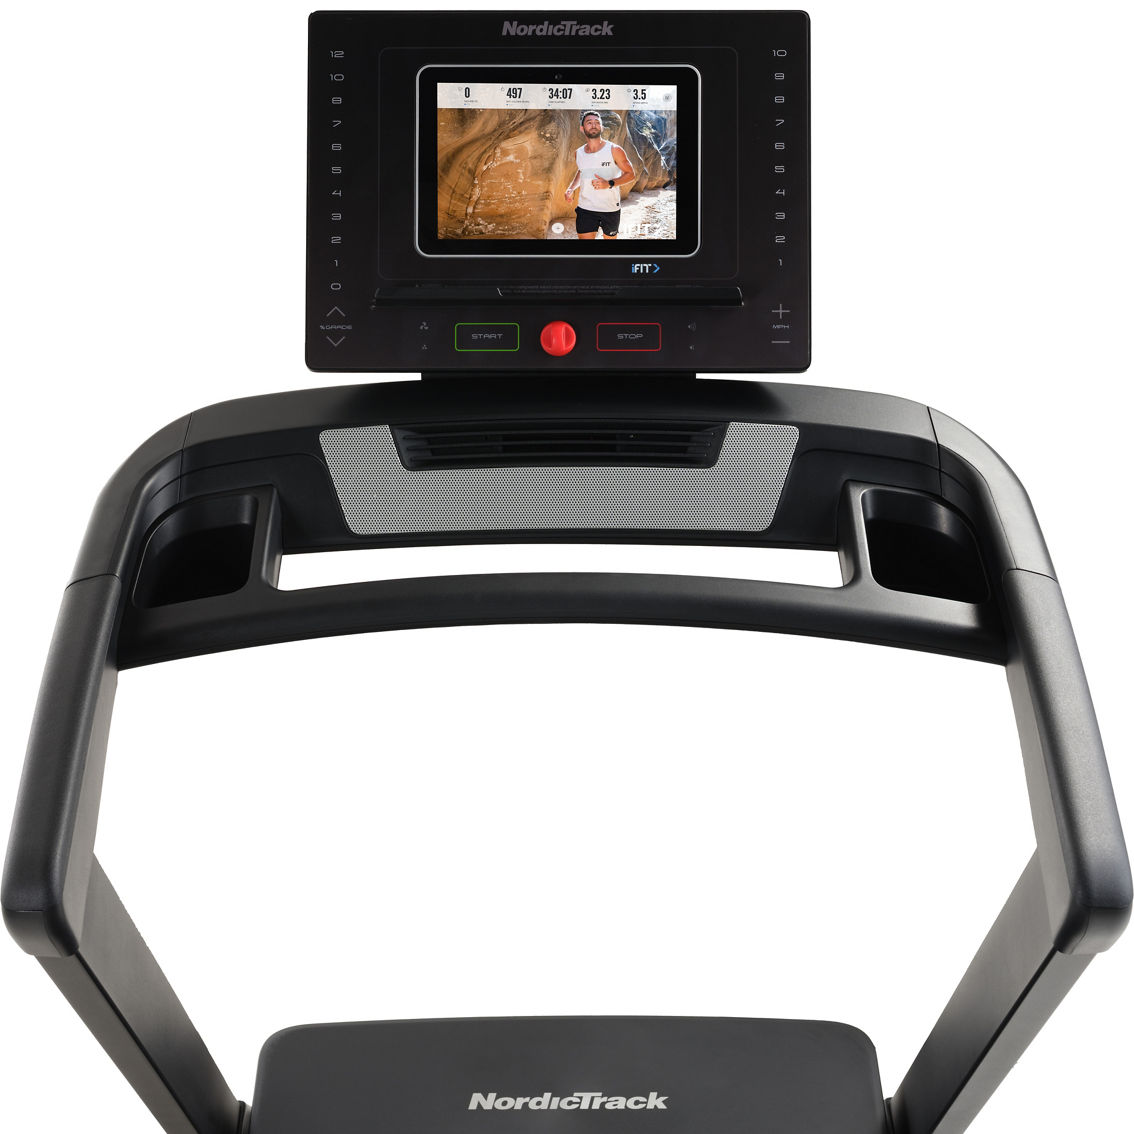 NordicTrack EXP 10i Treadmill - Image 2 of 4